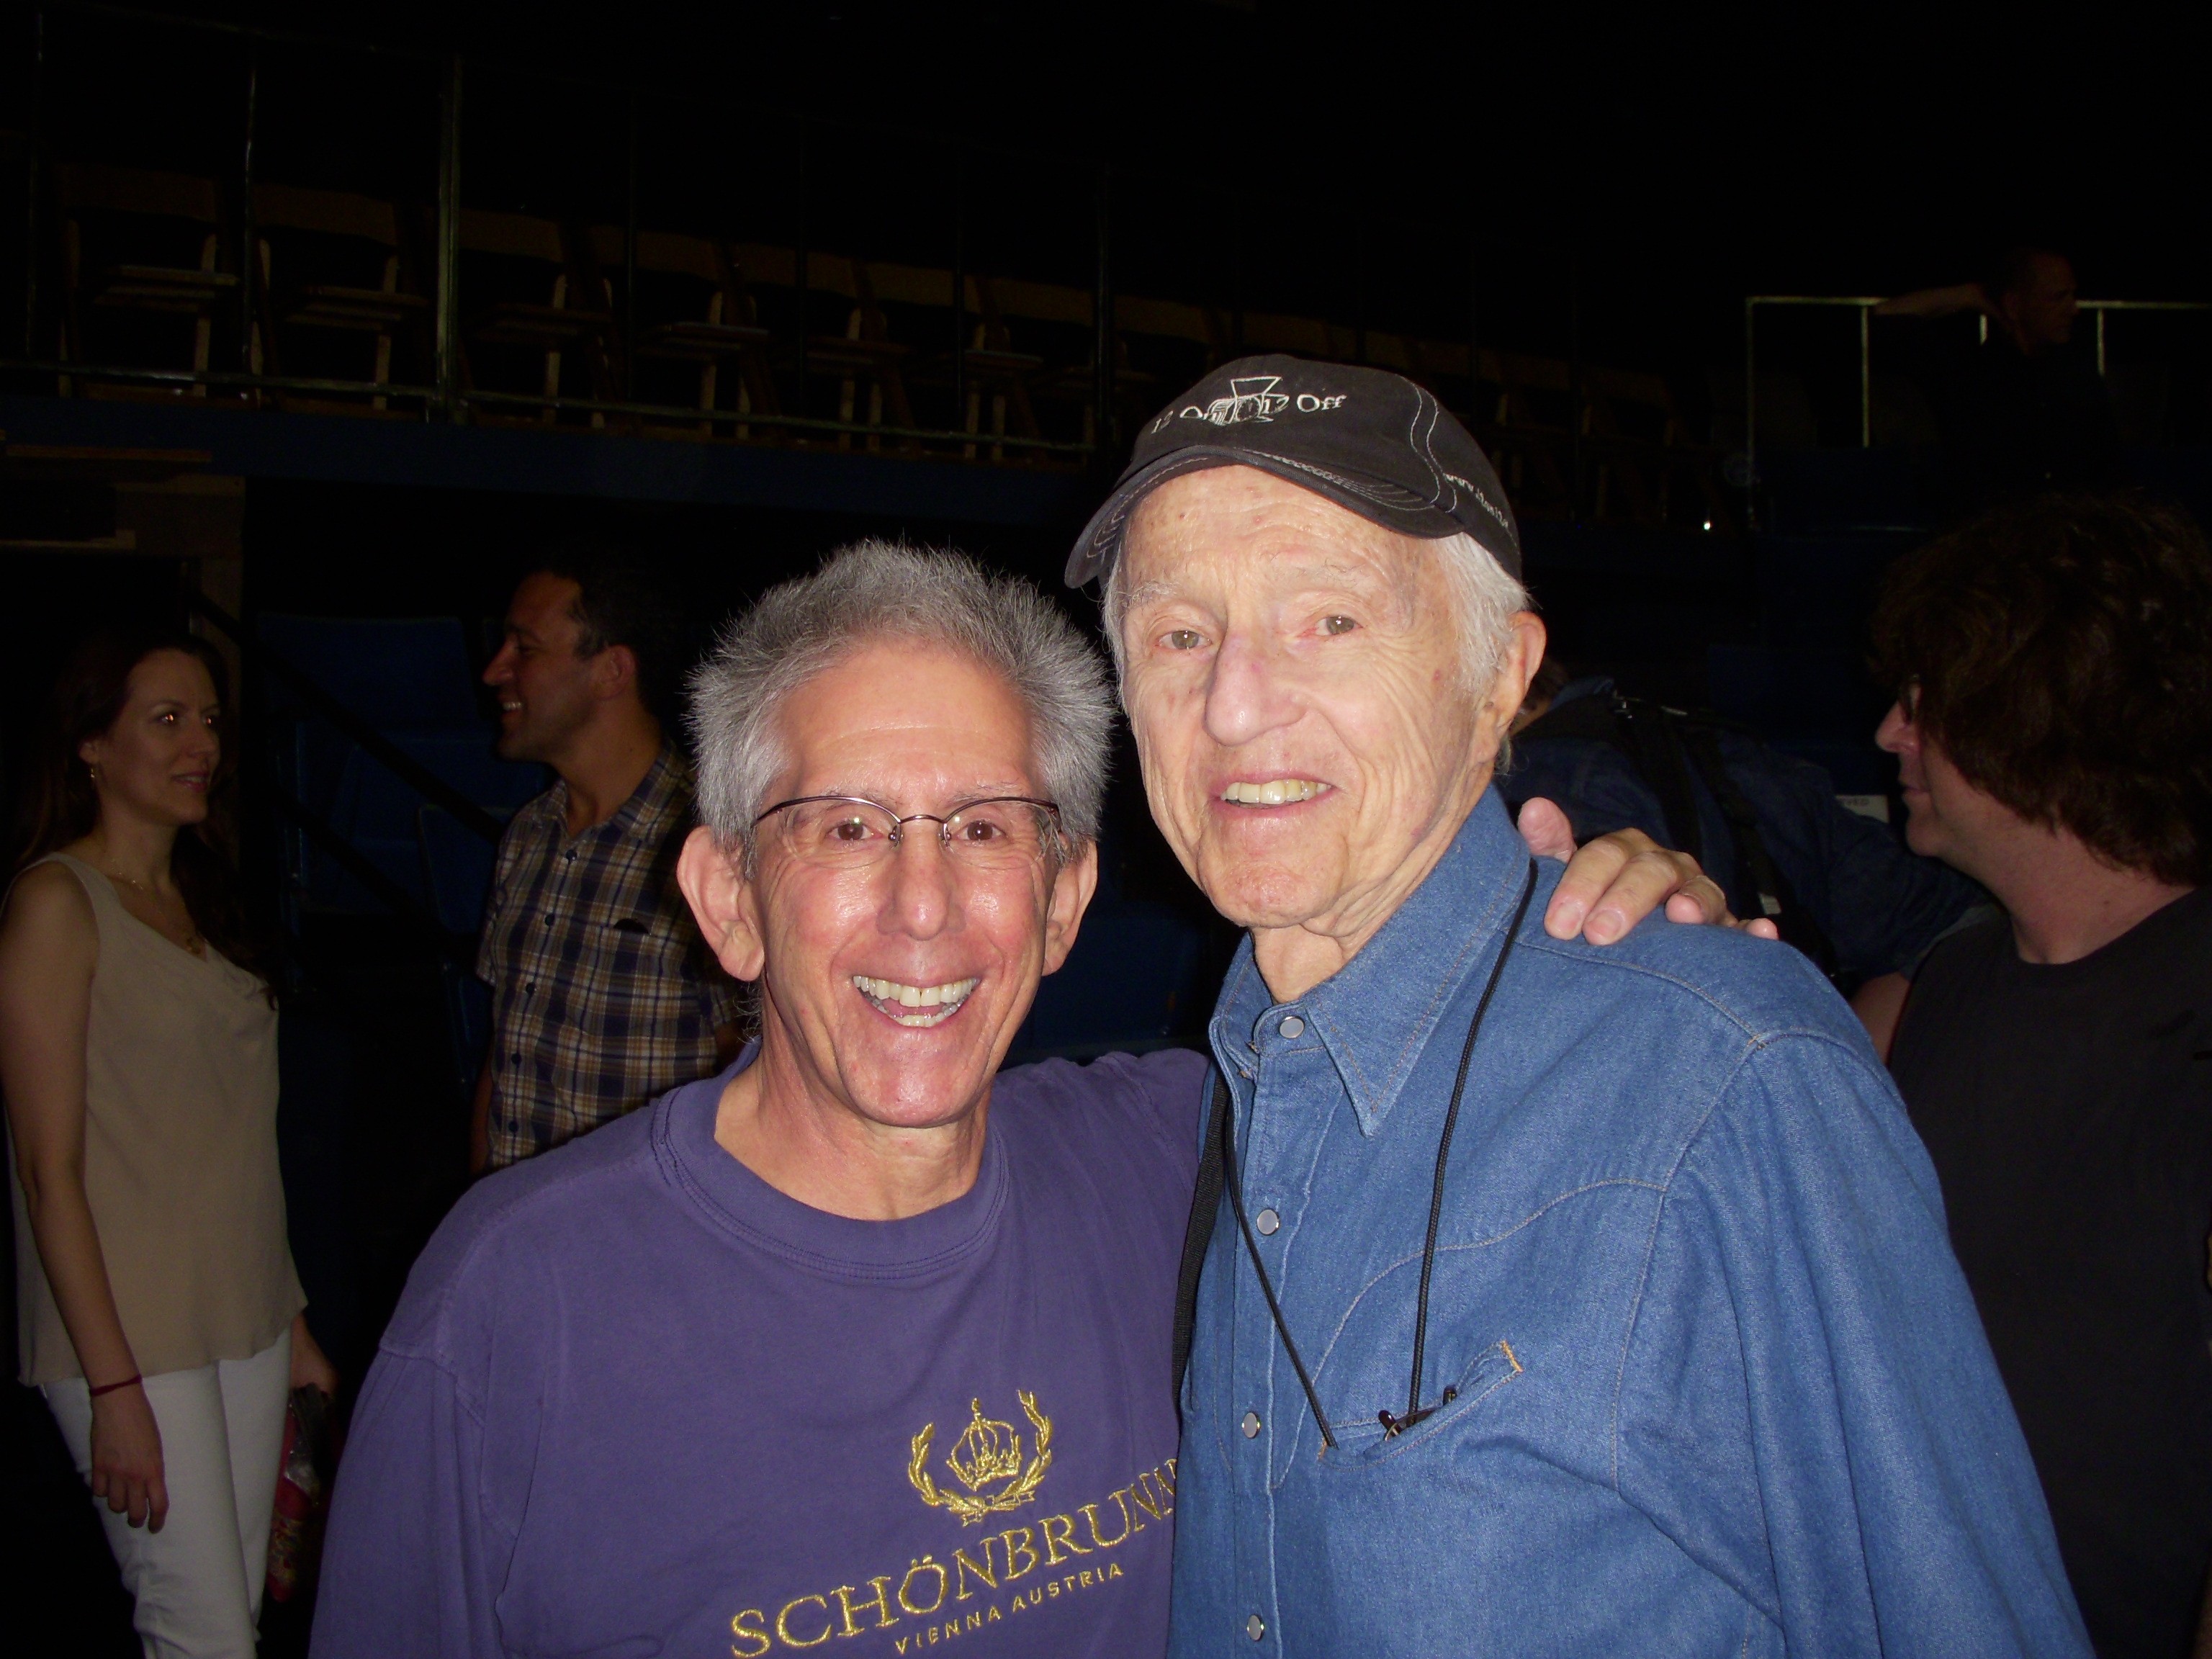 With the legendary 2 time Oscar winning cinematographer Haskell Wexler as he filmed our play 